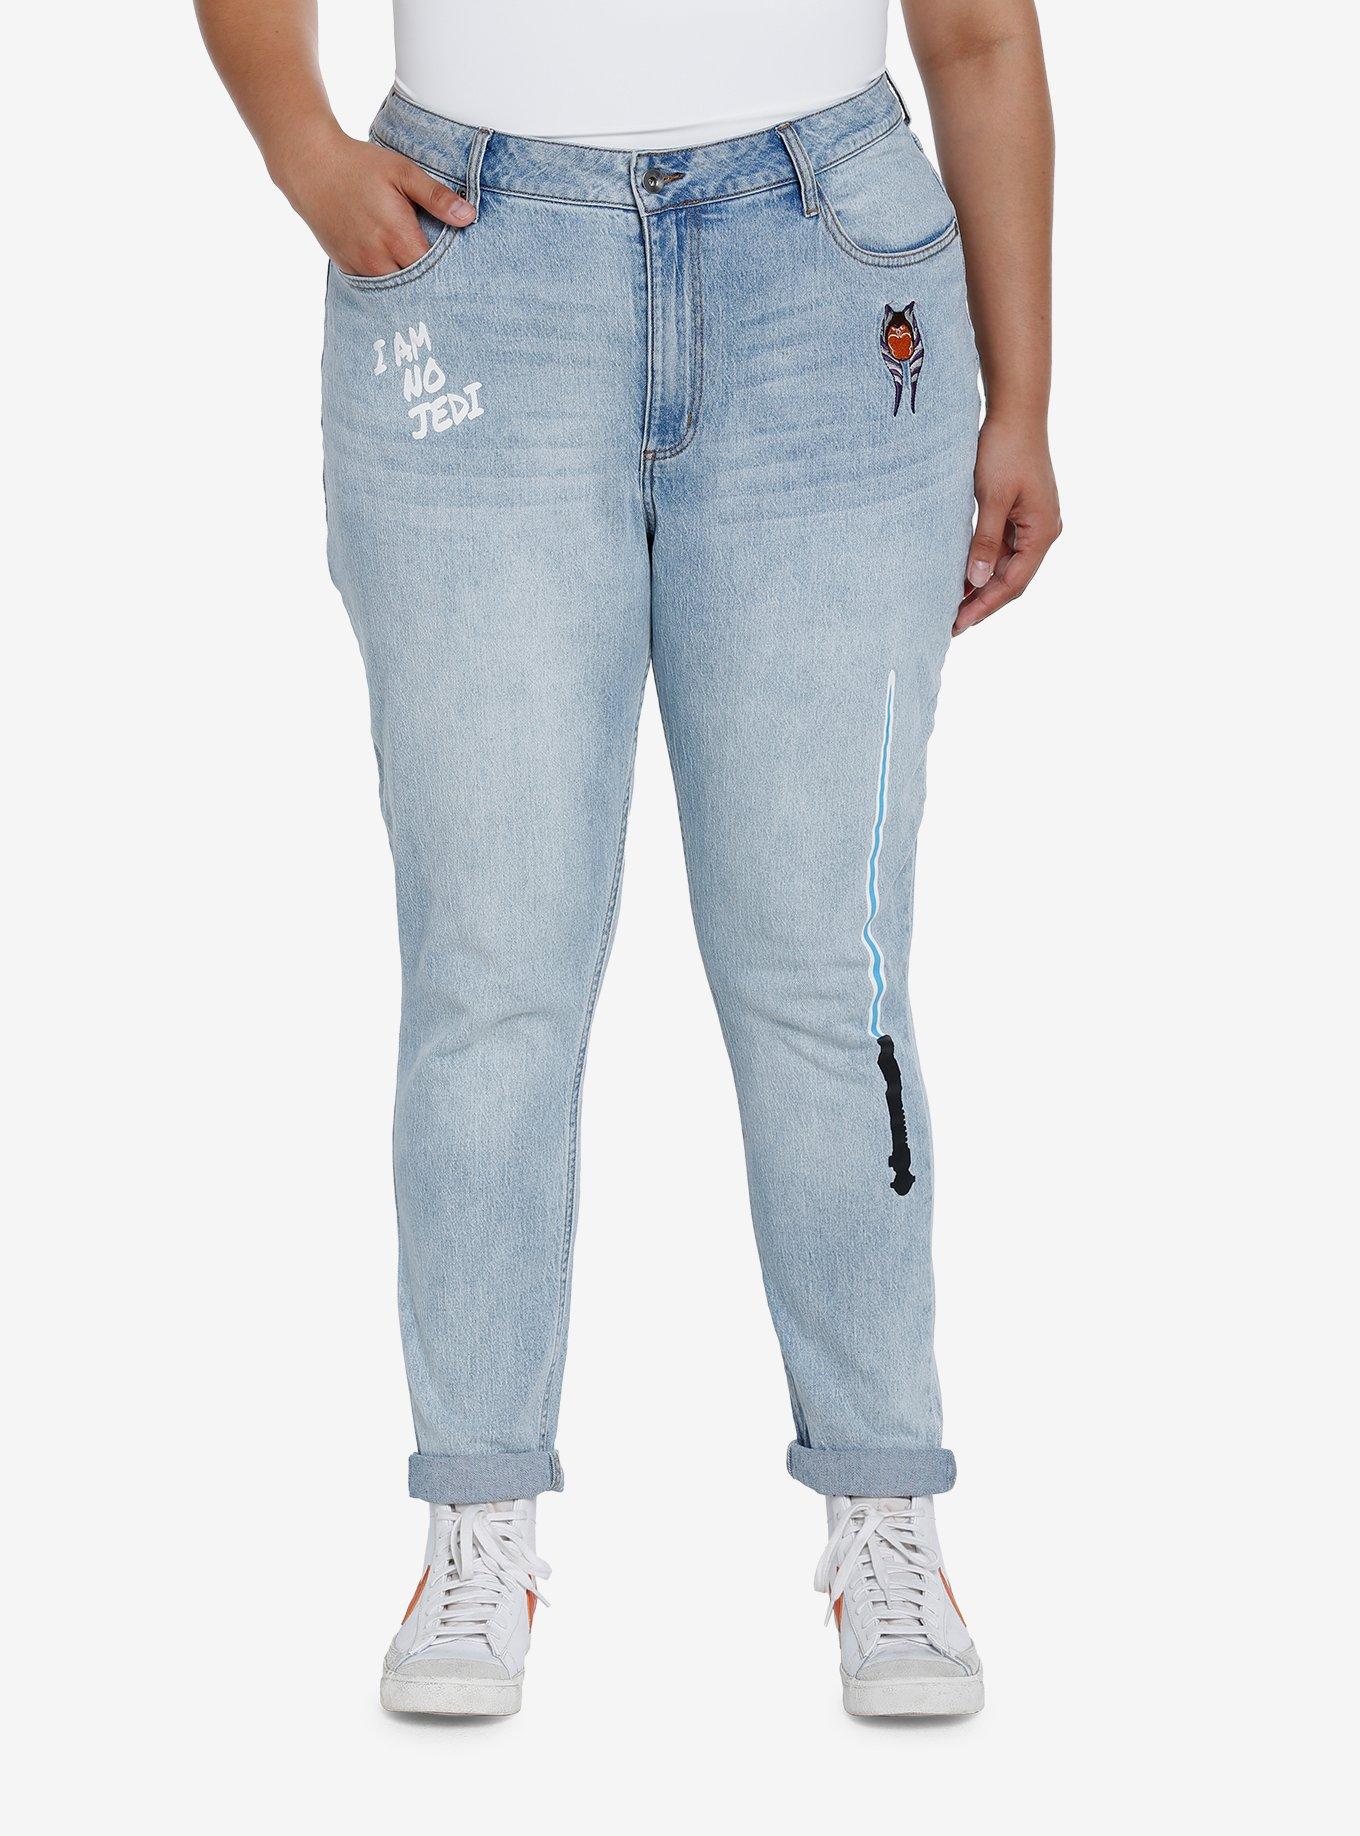 Her Universe Star Wars Ahsoka Mom Jeans Plus Size Her Universe Exclusive, BLUE, hi-res